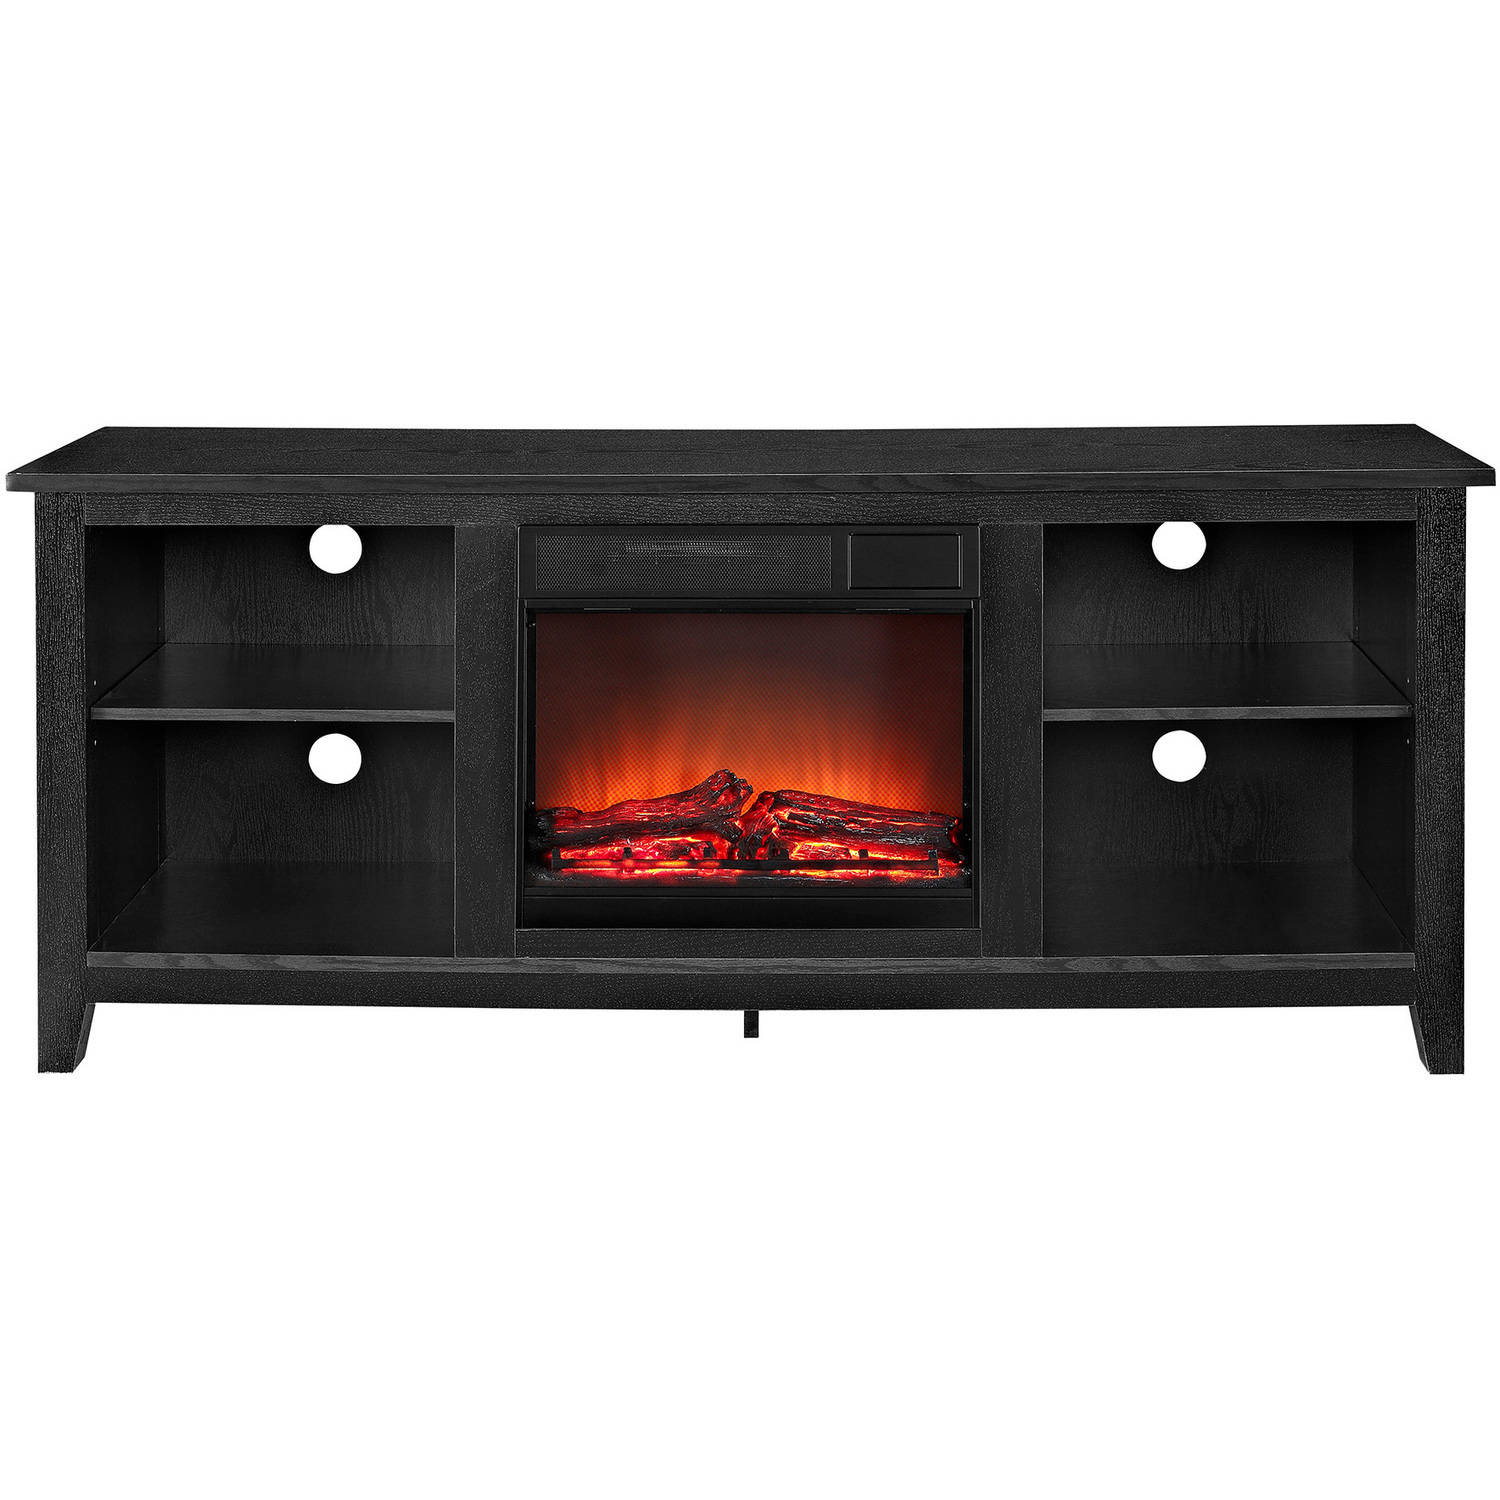 Walker Edison Traditional Fireplace TV Stand for TVs Up to 64" - Black - image 4 of 9